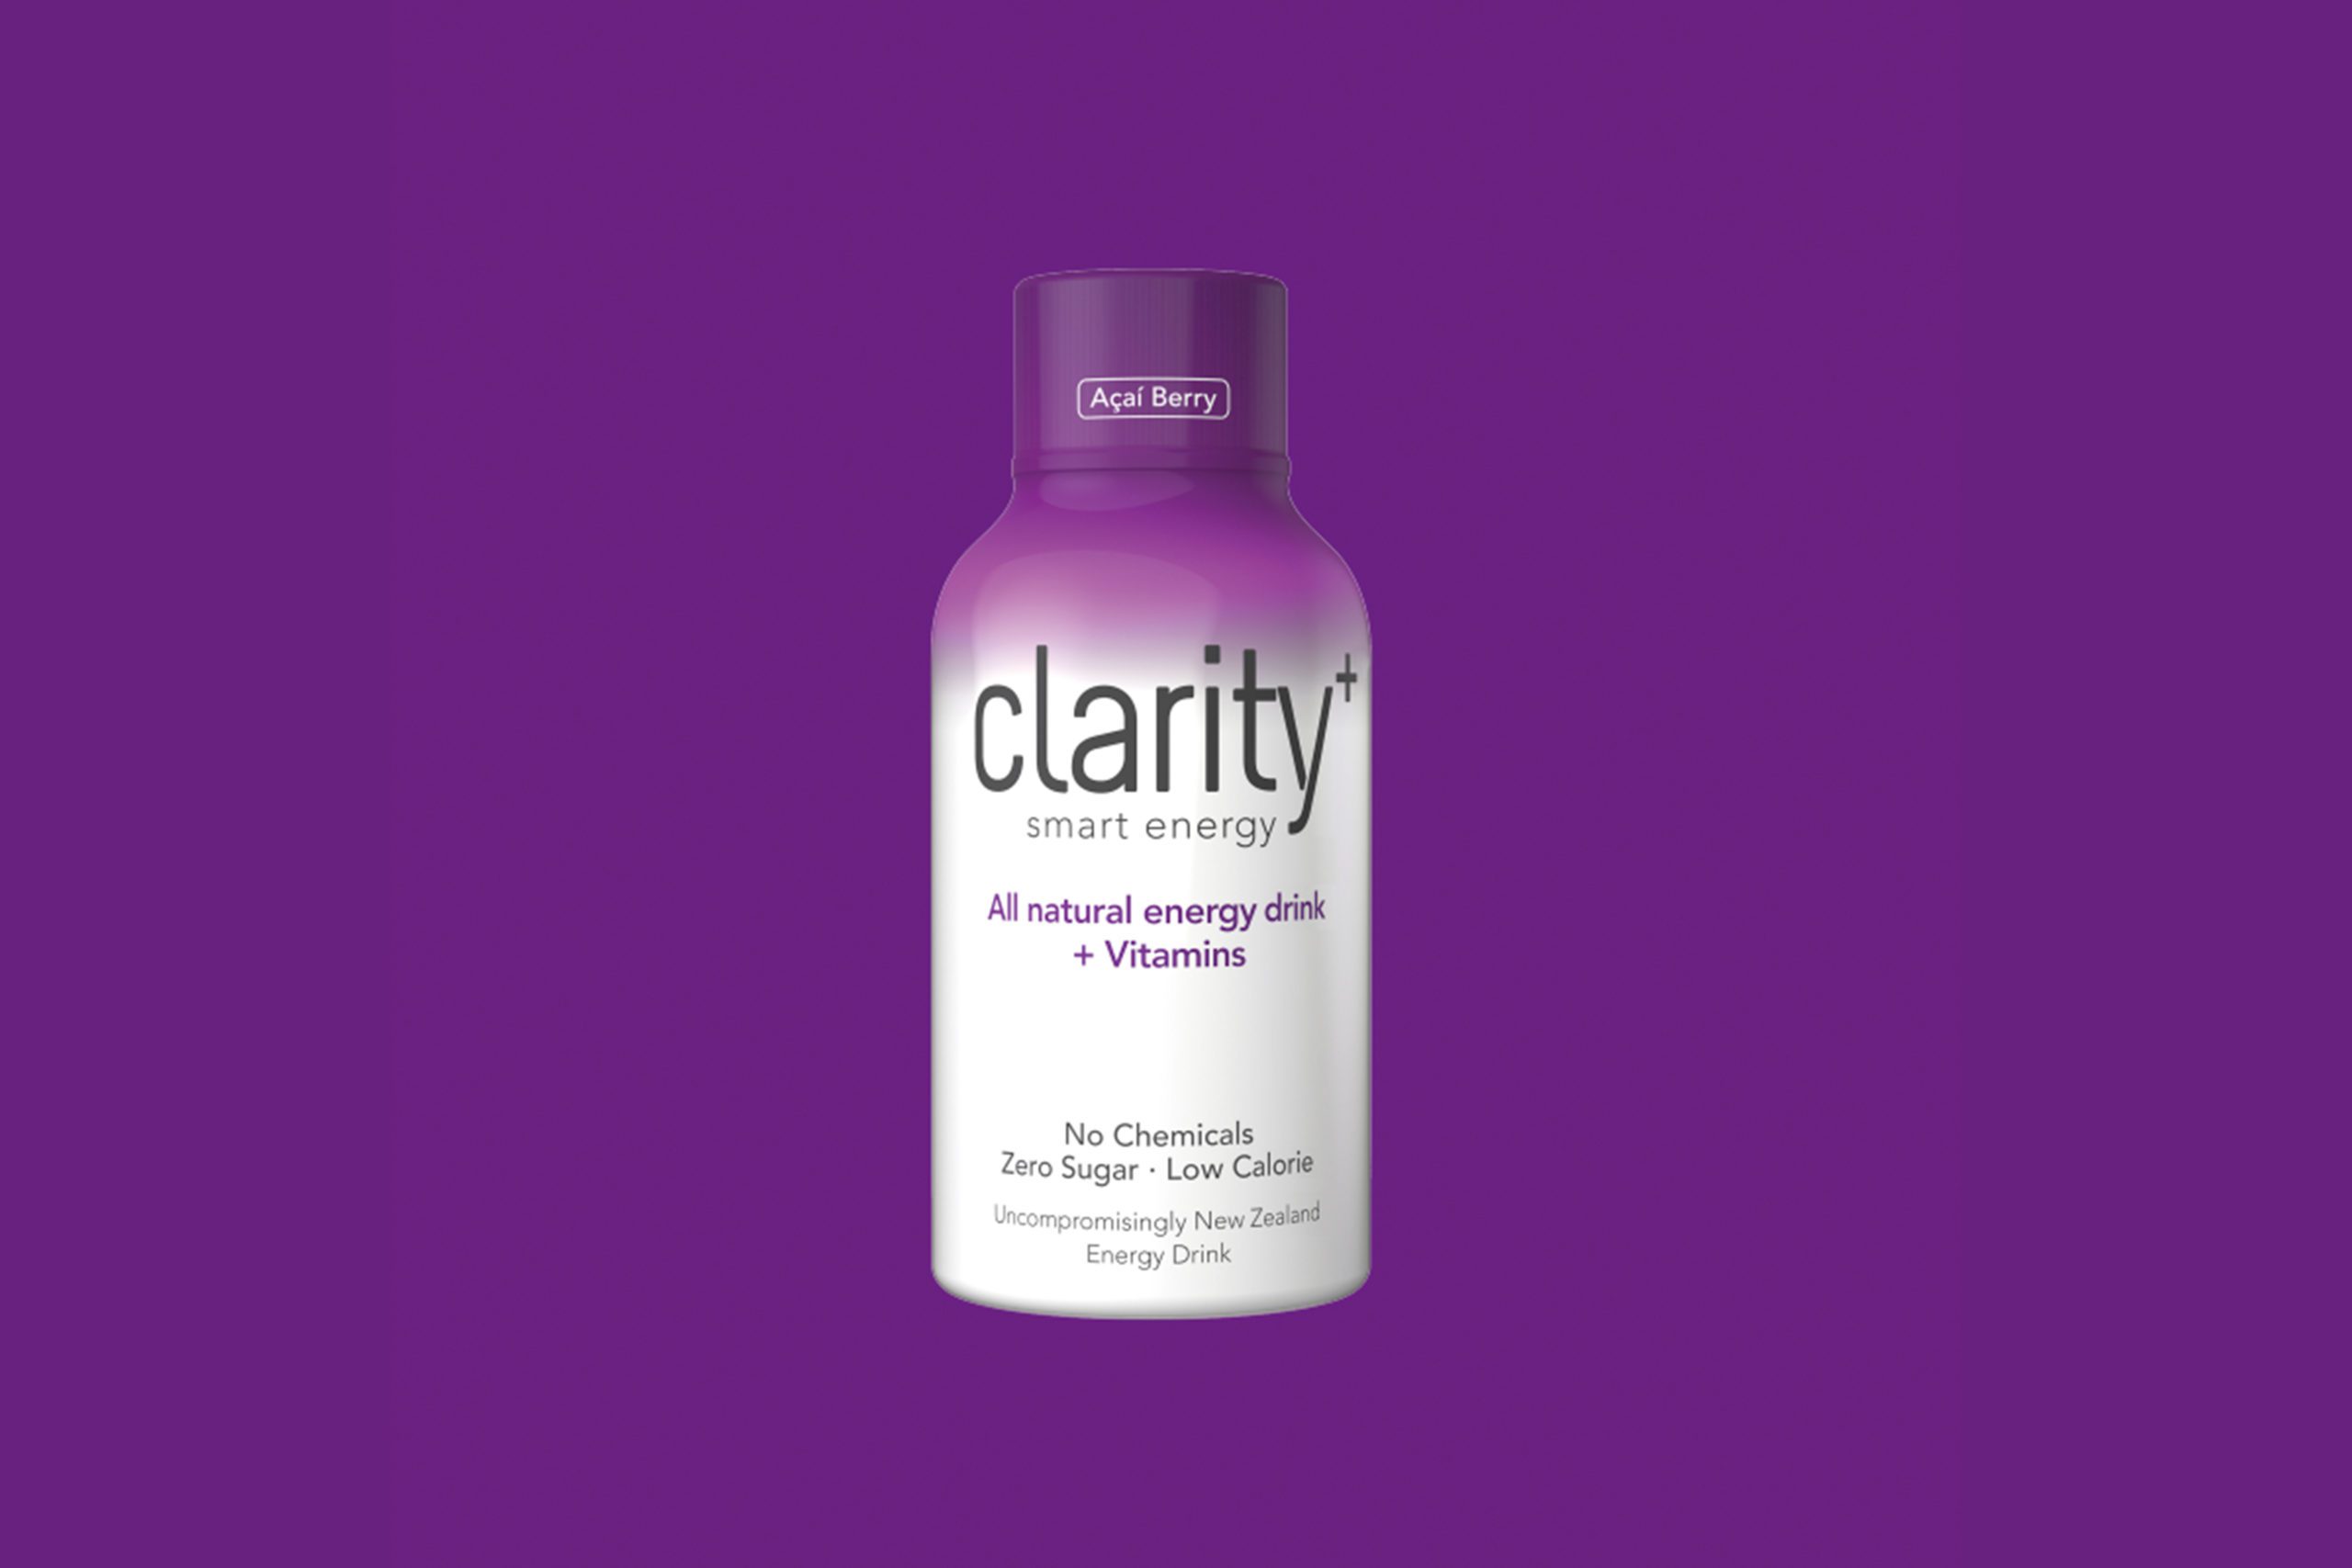 Bottle of Clarity with purple background